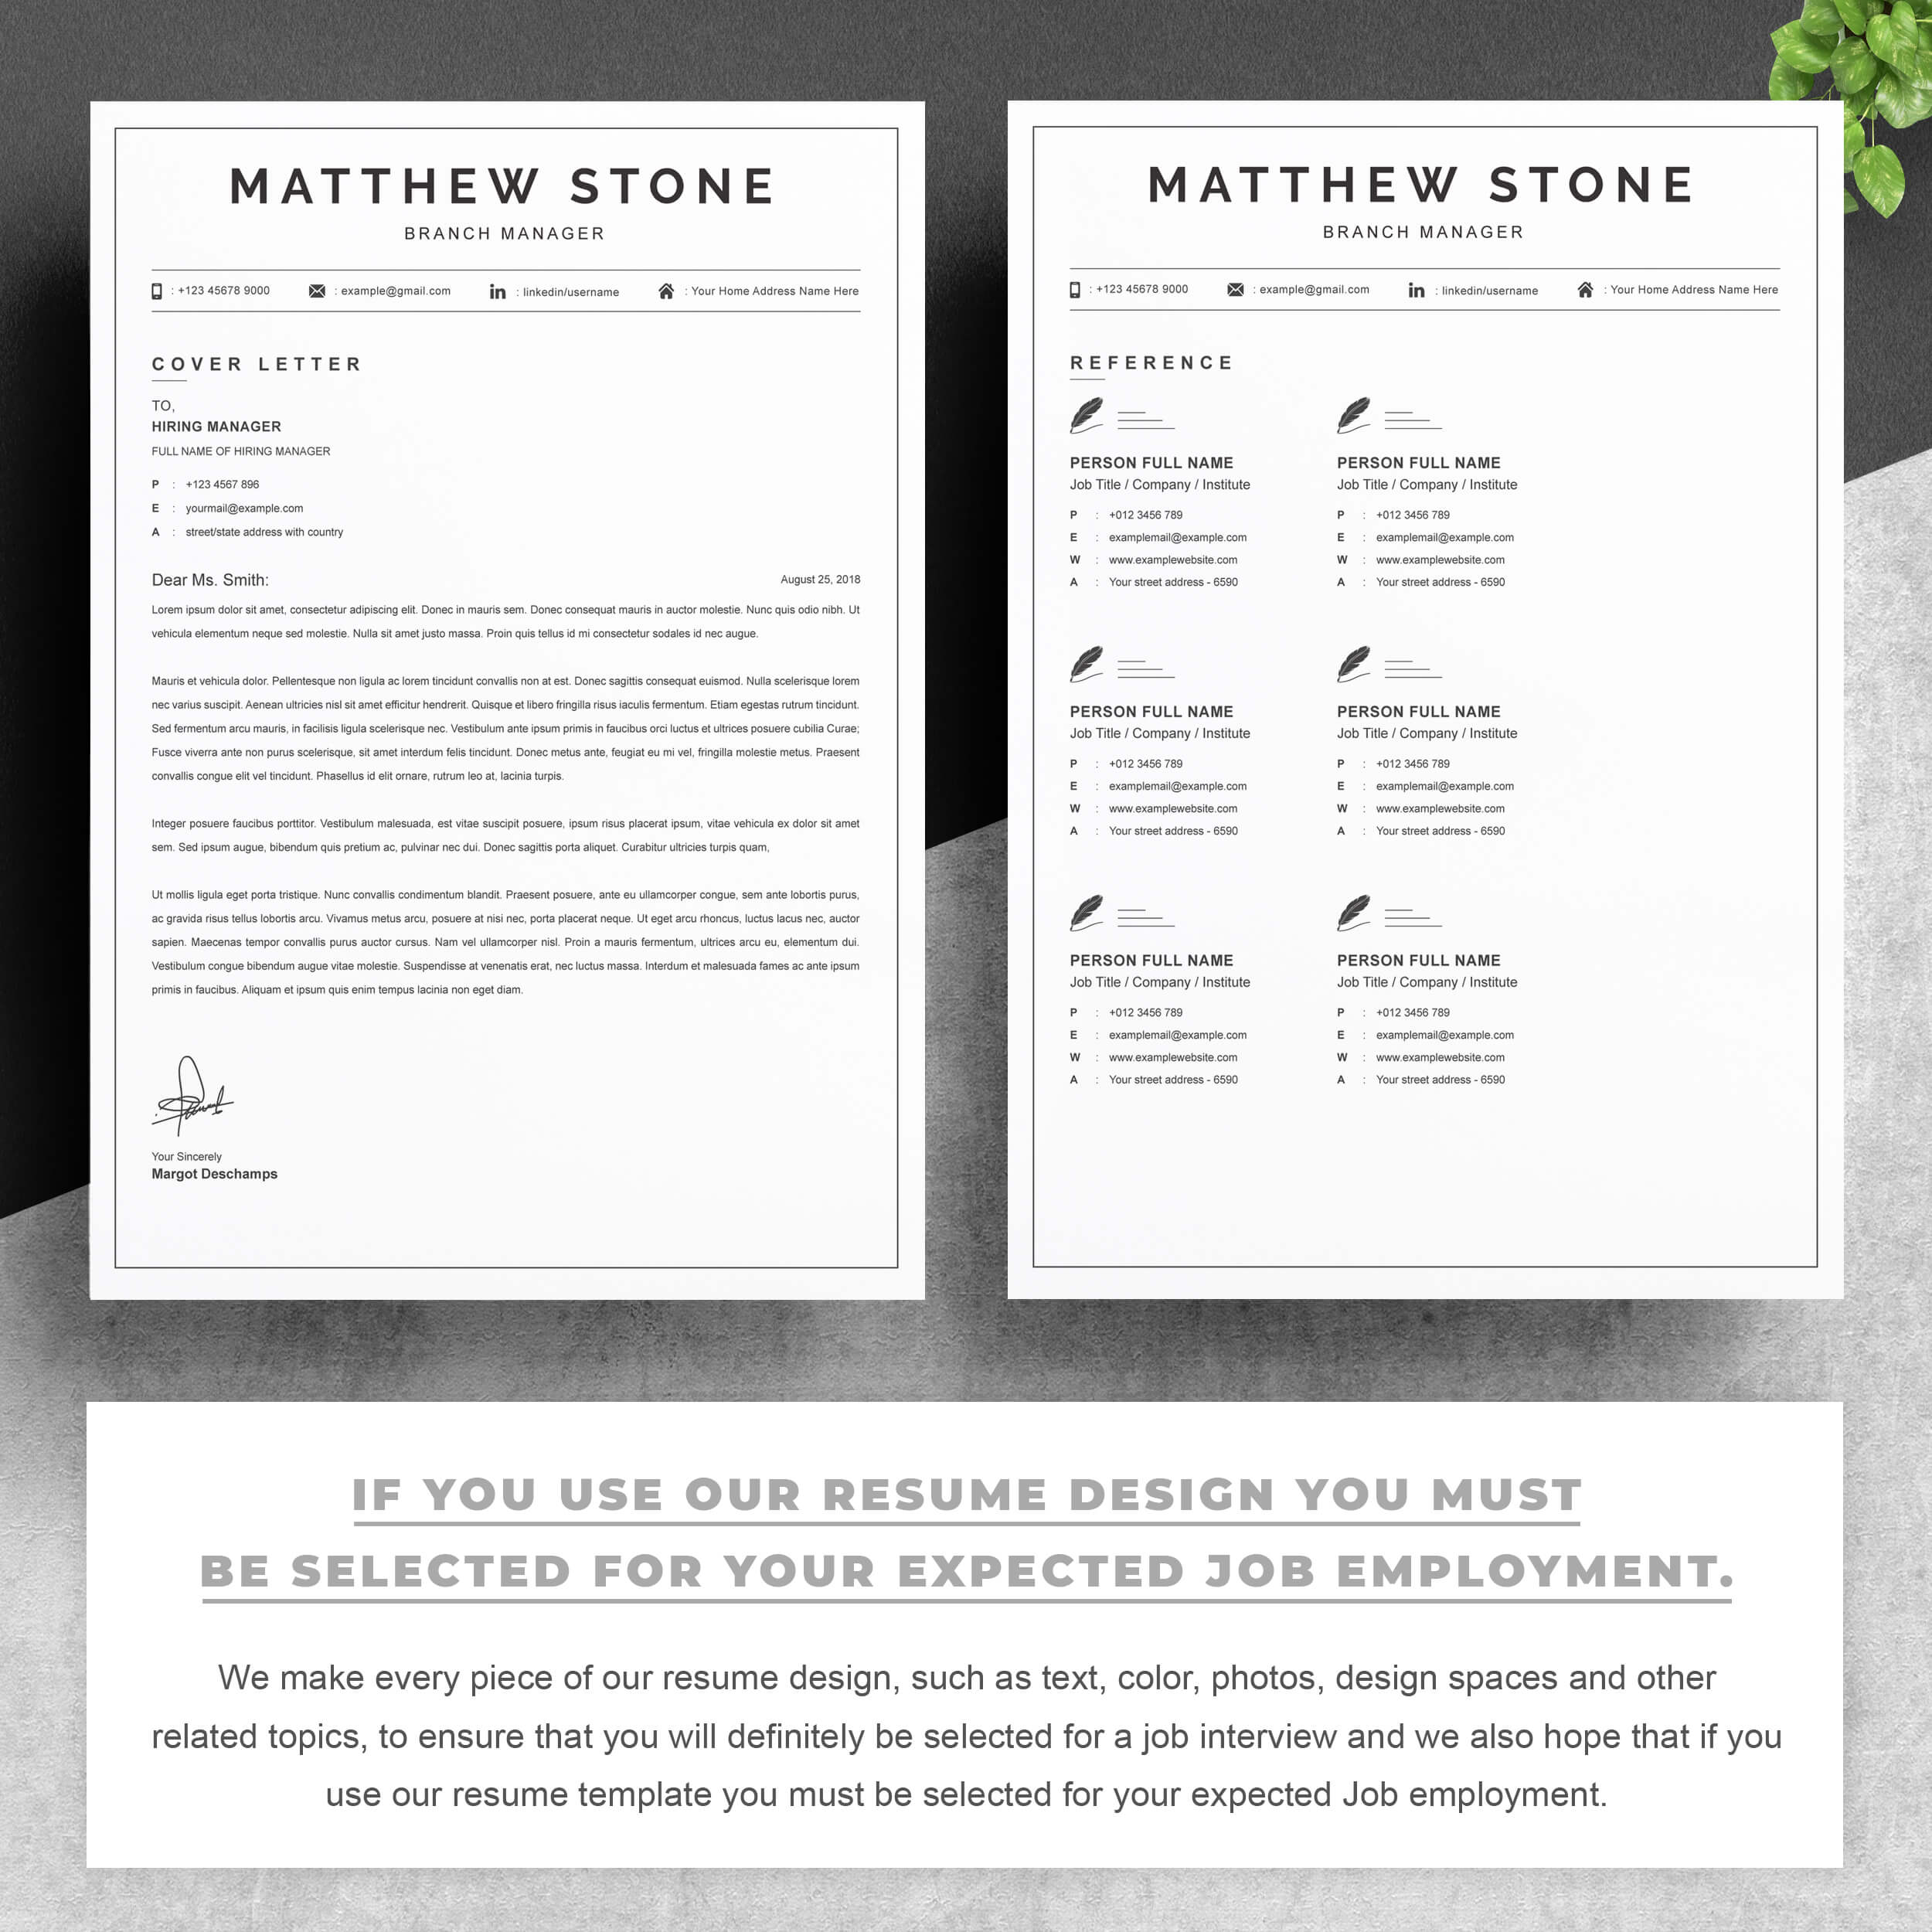 03 2 pages free resume design template copy 355